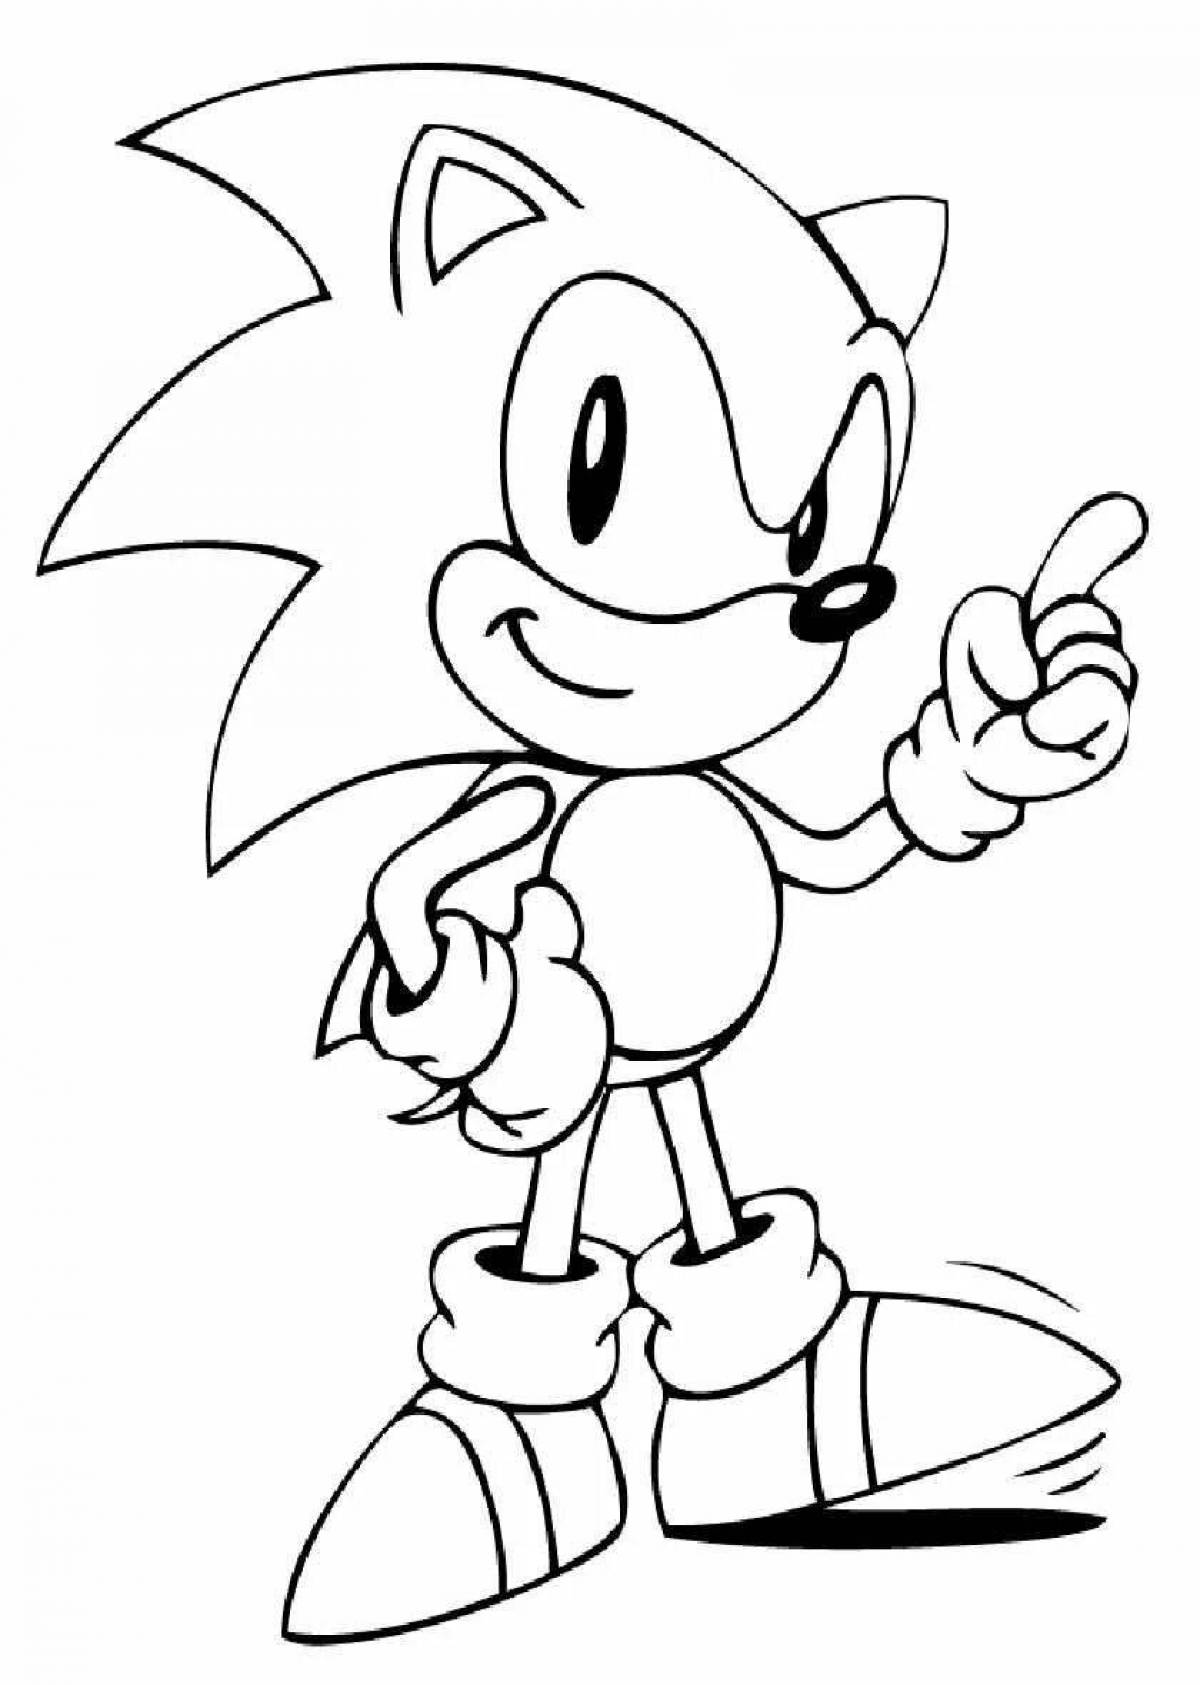 Generous darkspine sonic coloring page